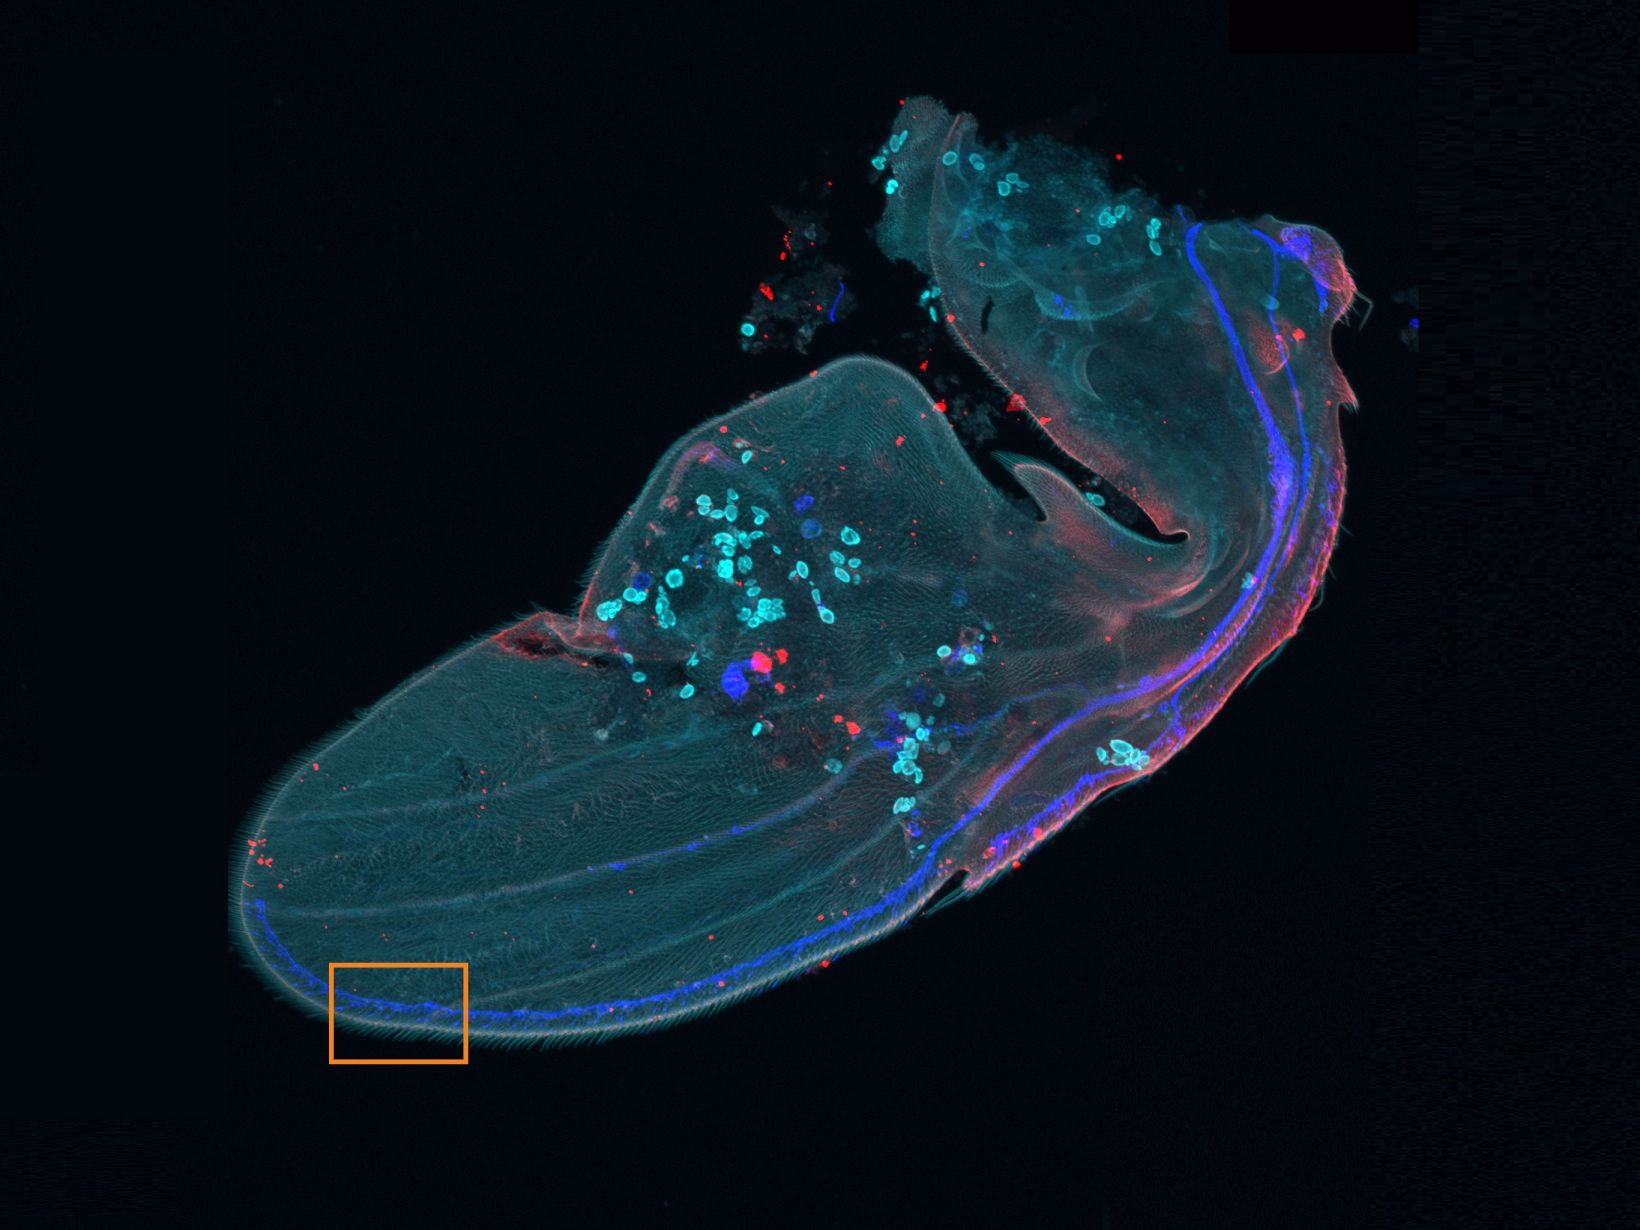 Overview image of a Drosophila wing